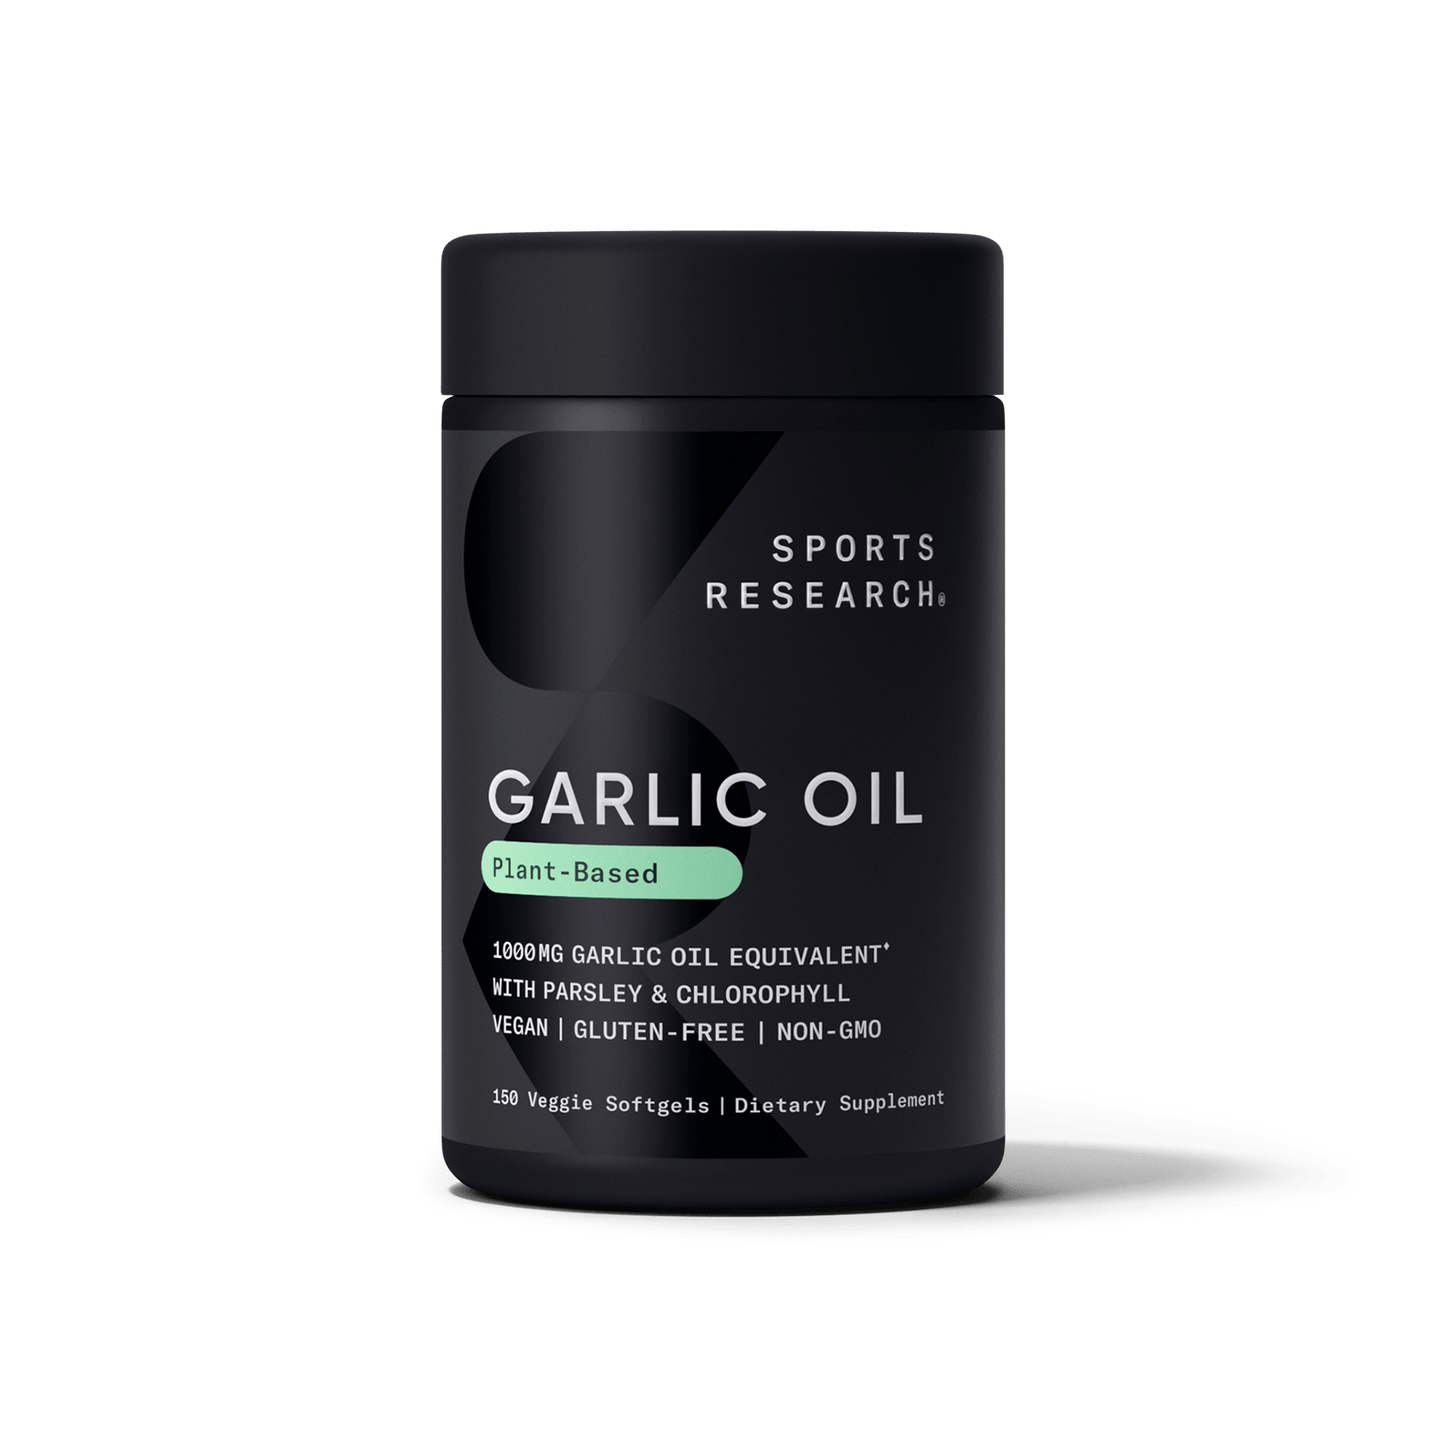 Sports Research Garlic Oil with Parsley and Chlorophyll.